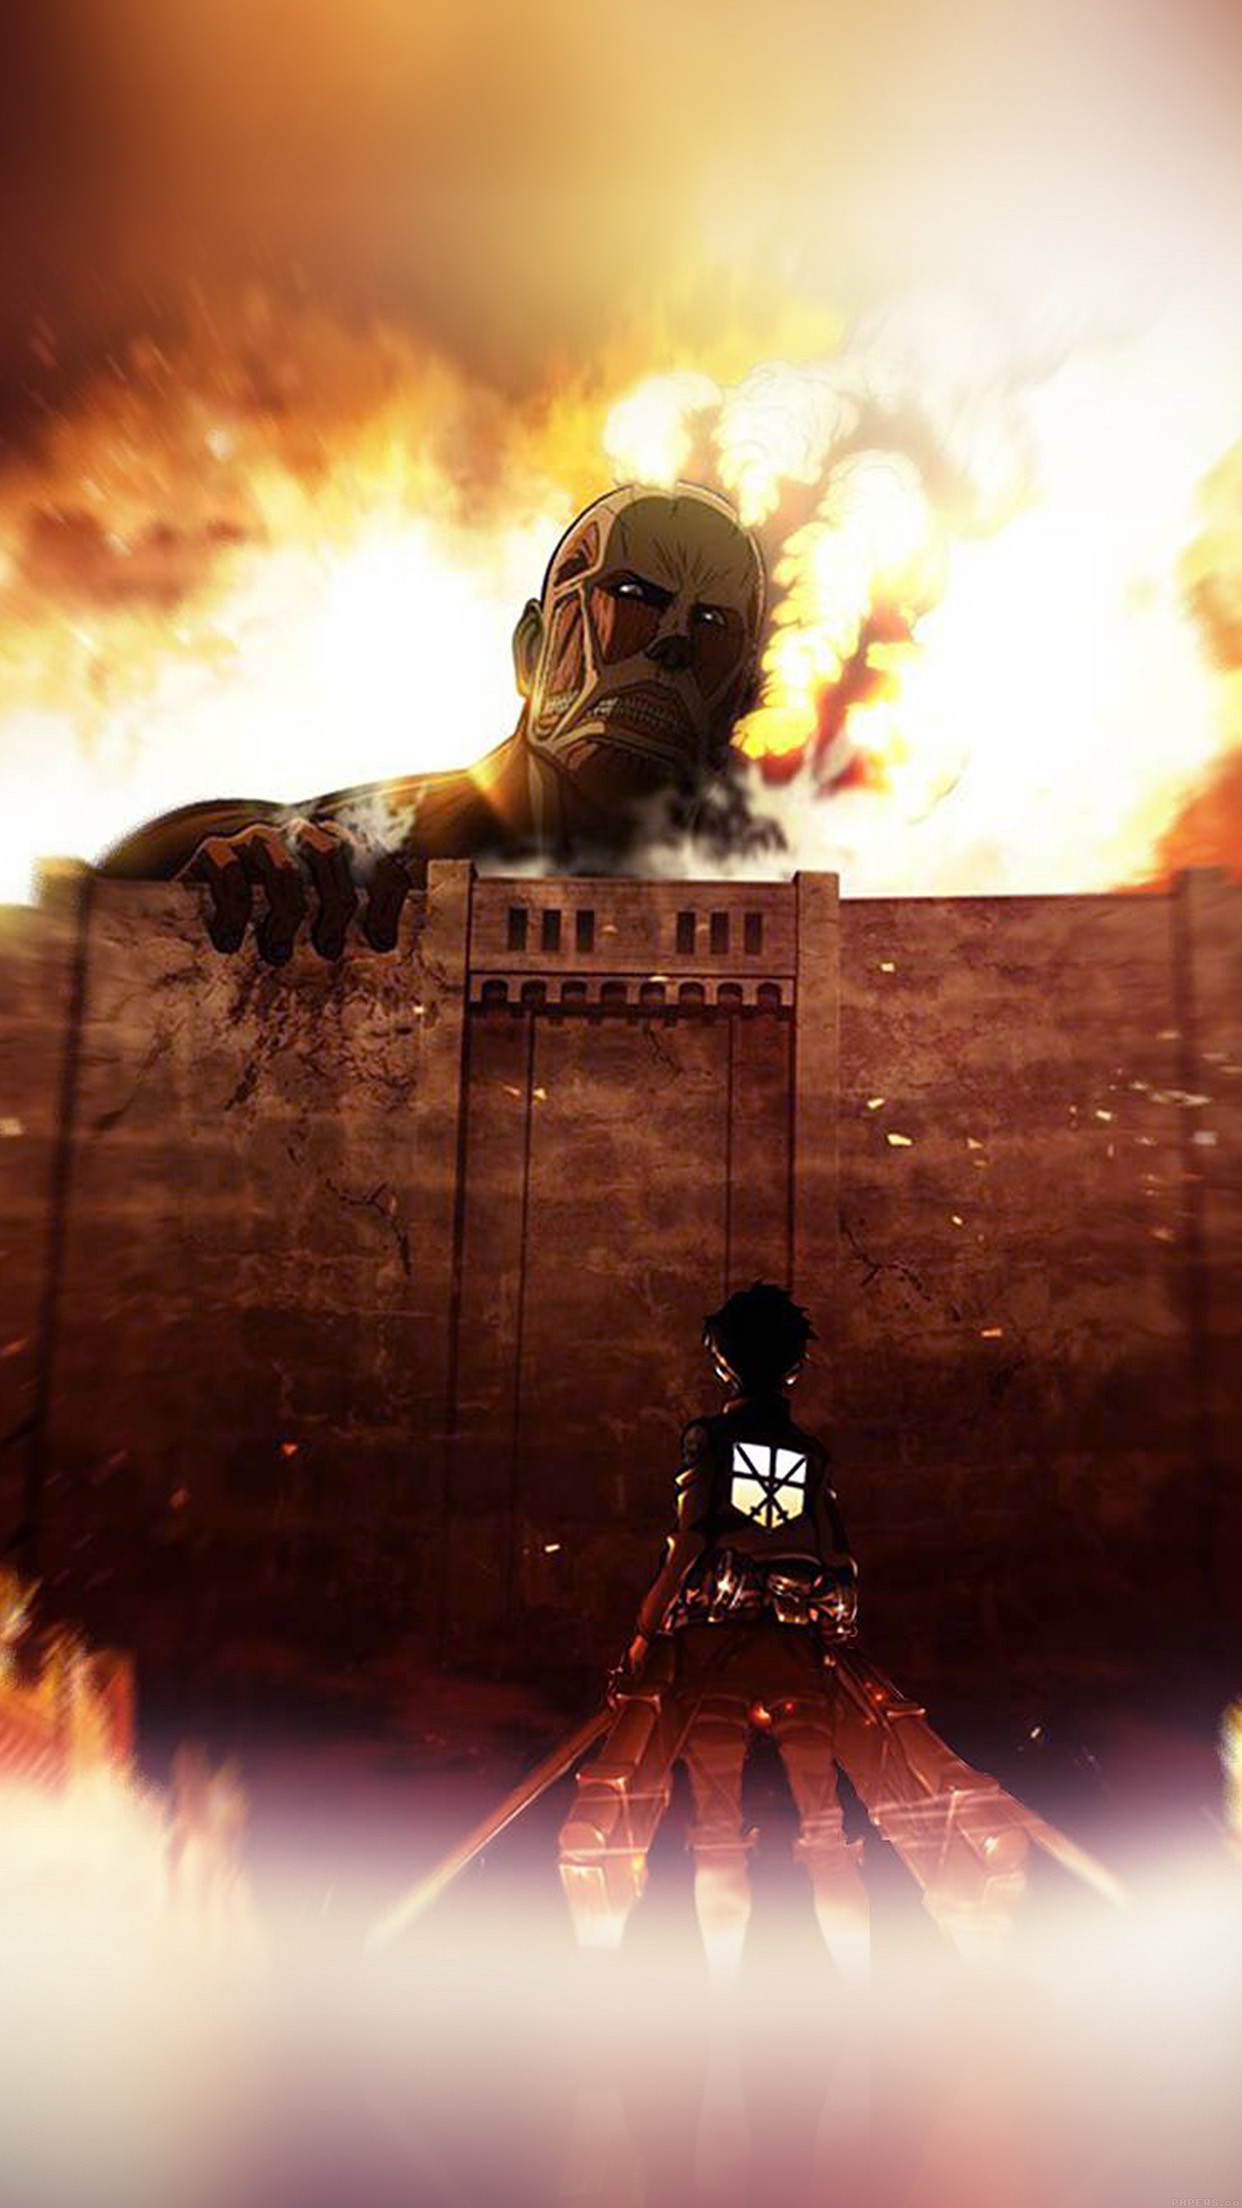 Attack On Titan IOS Wallpaper (76+ images)